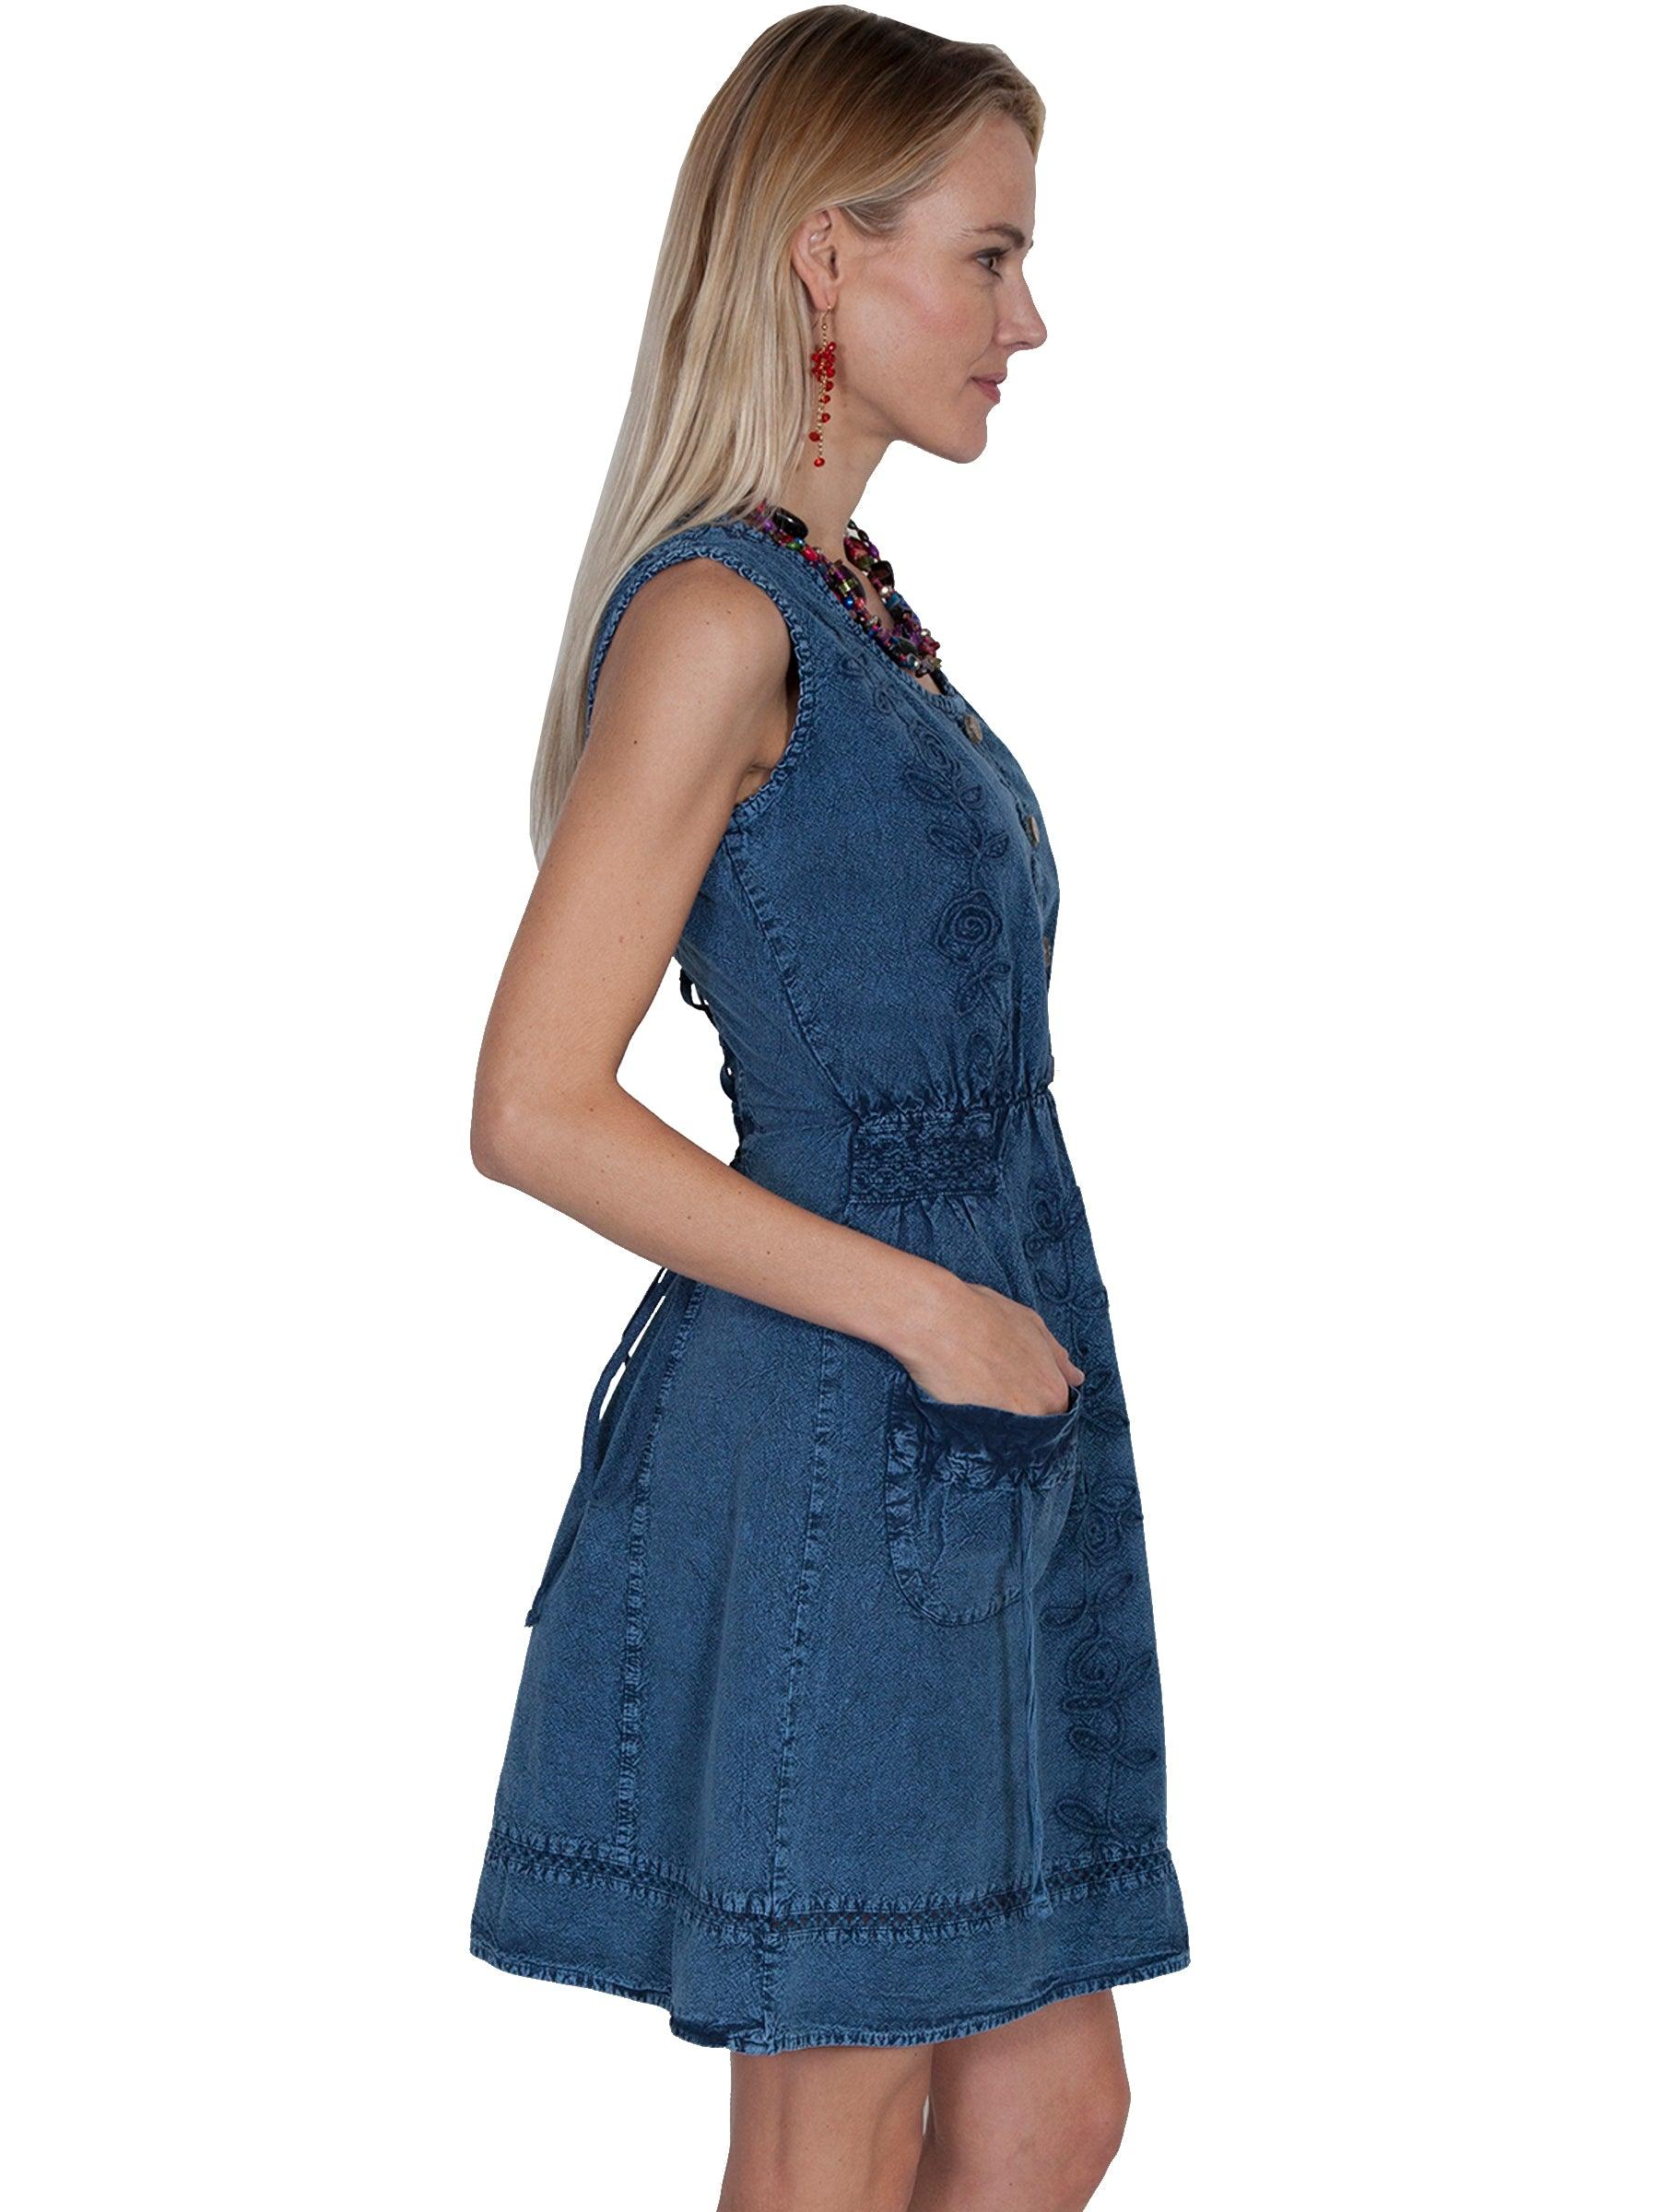 Scully DARK BLUE S/L EMBROIDERED DRESS W/BACK LACE UP - Flyclothing LLC